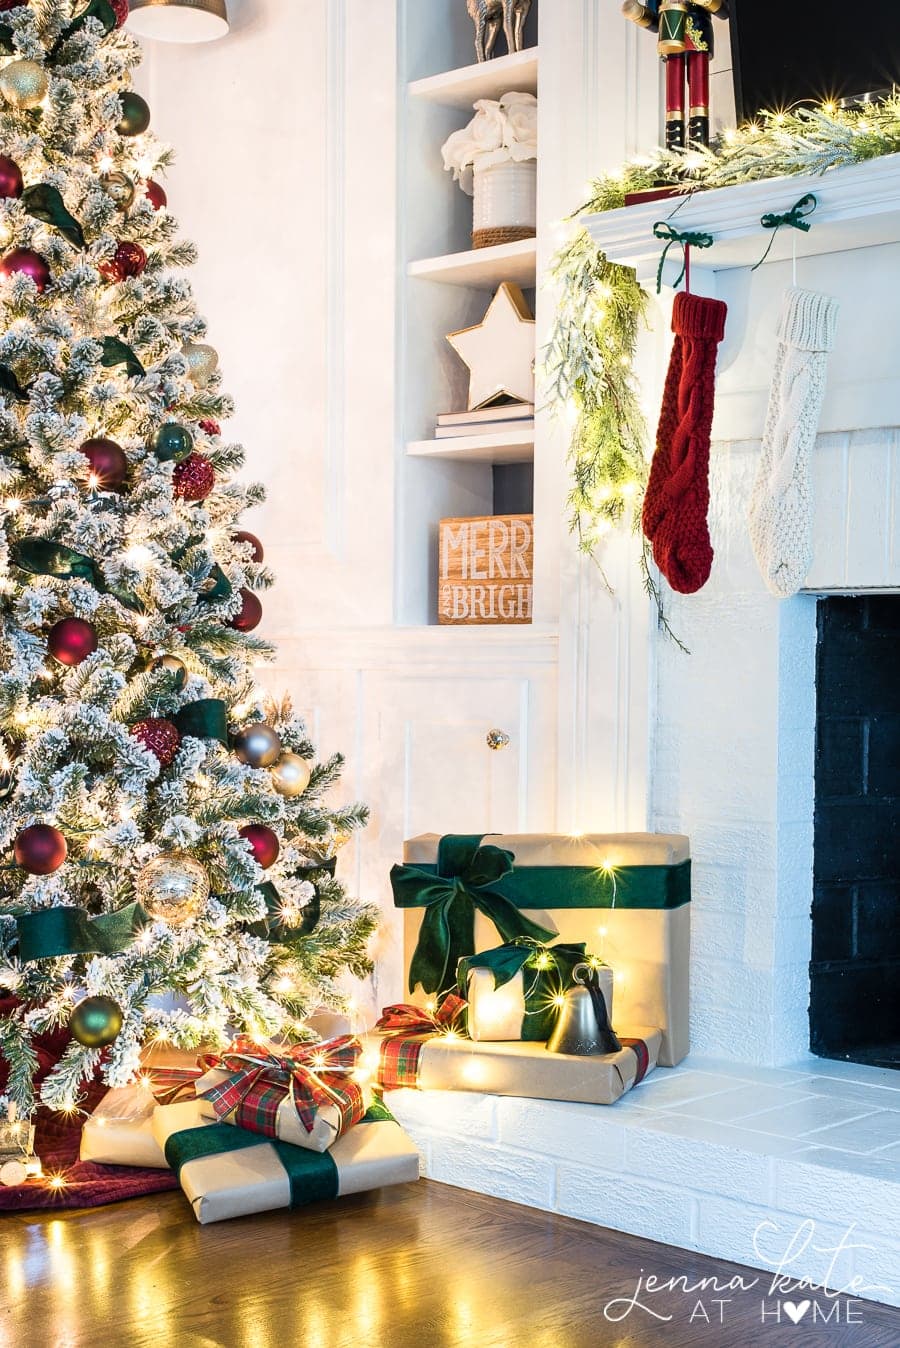 The side of a Christmas tree, resting near a fireplace, with presents and stockings nearby